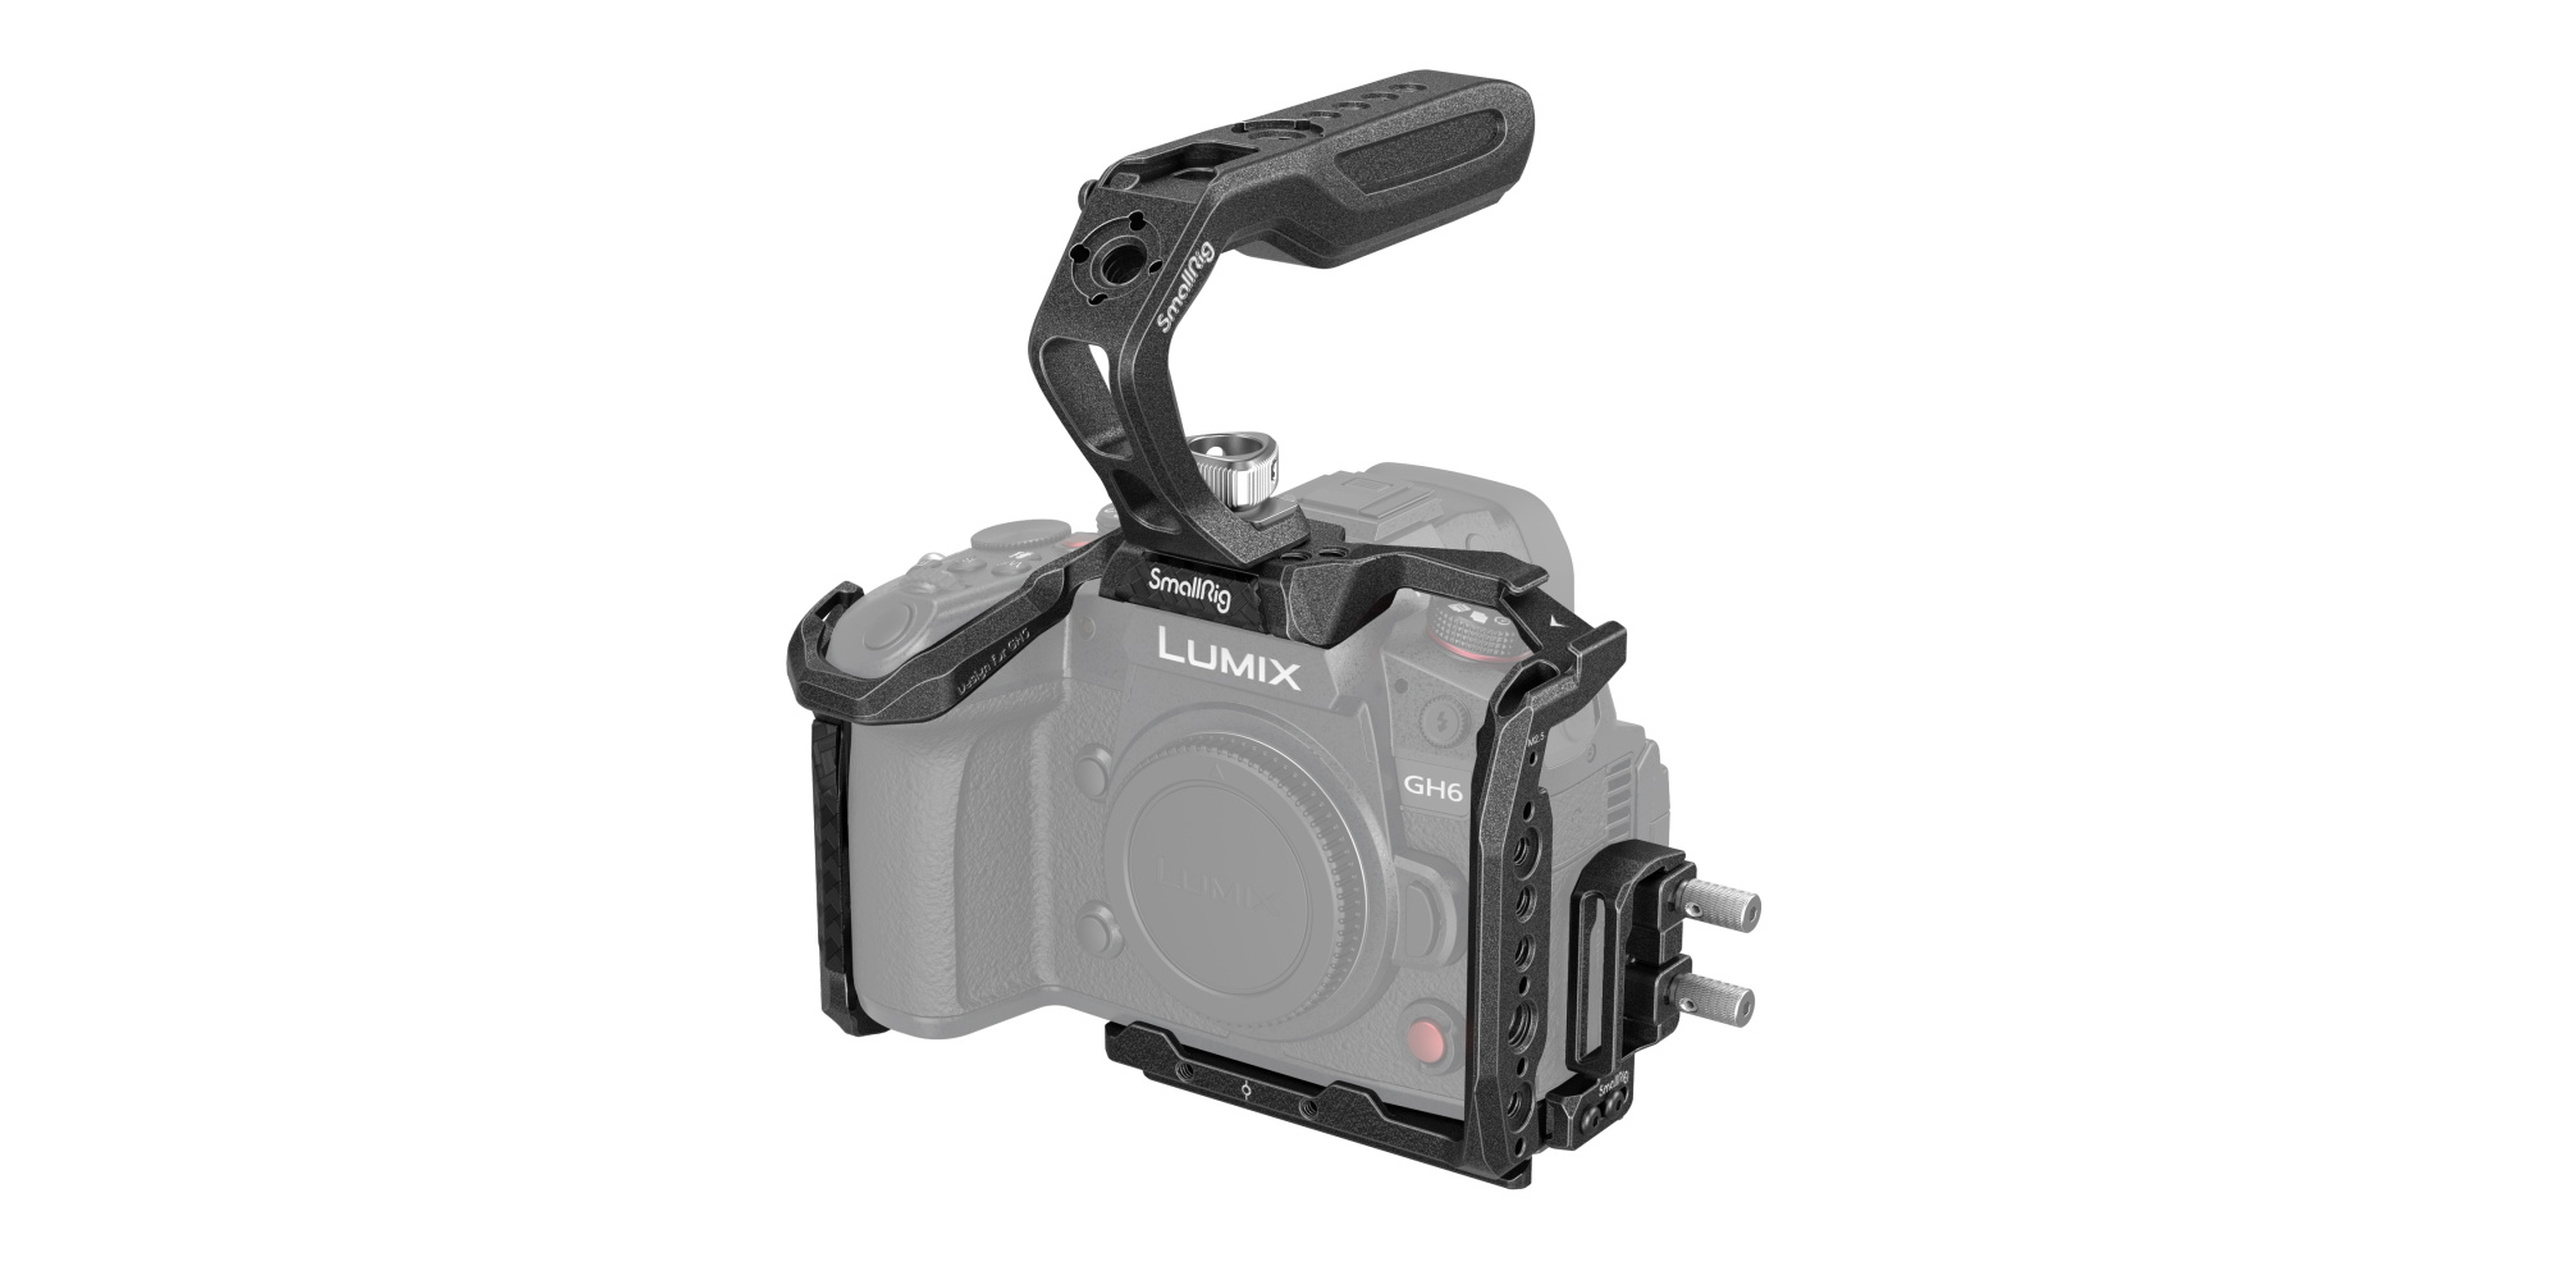 scherp Wreed Chemicus SmallRig announces the Black Mamba cage kit for the new Panasonic Lumix GH6  camera - NotebookCheck.net News